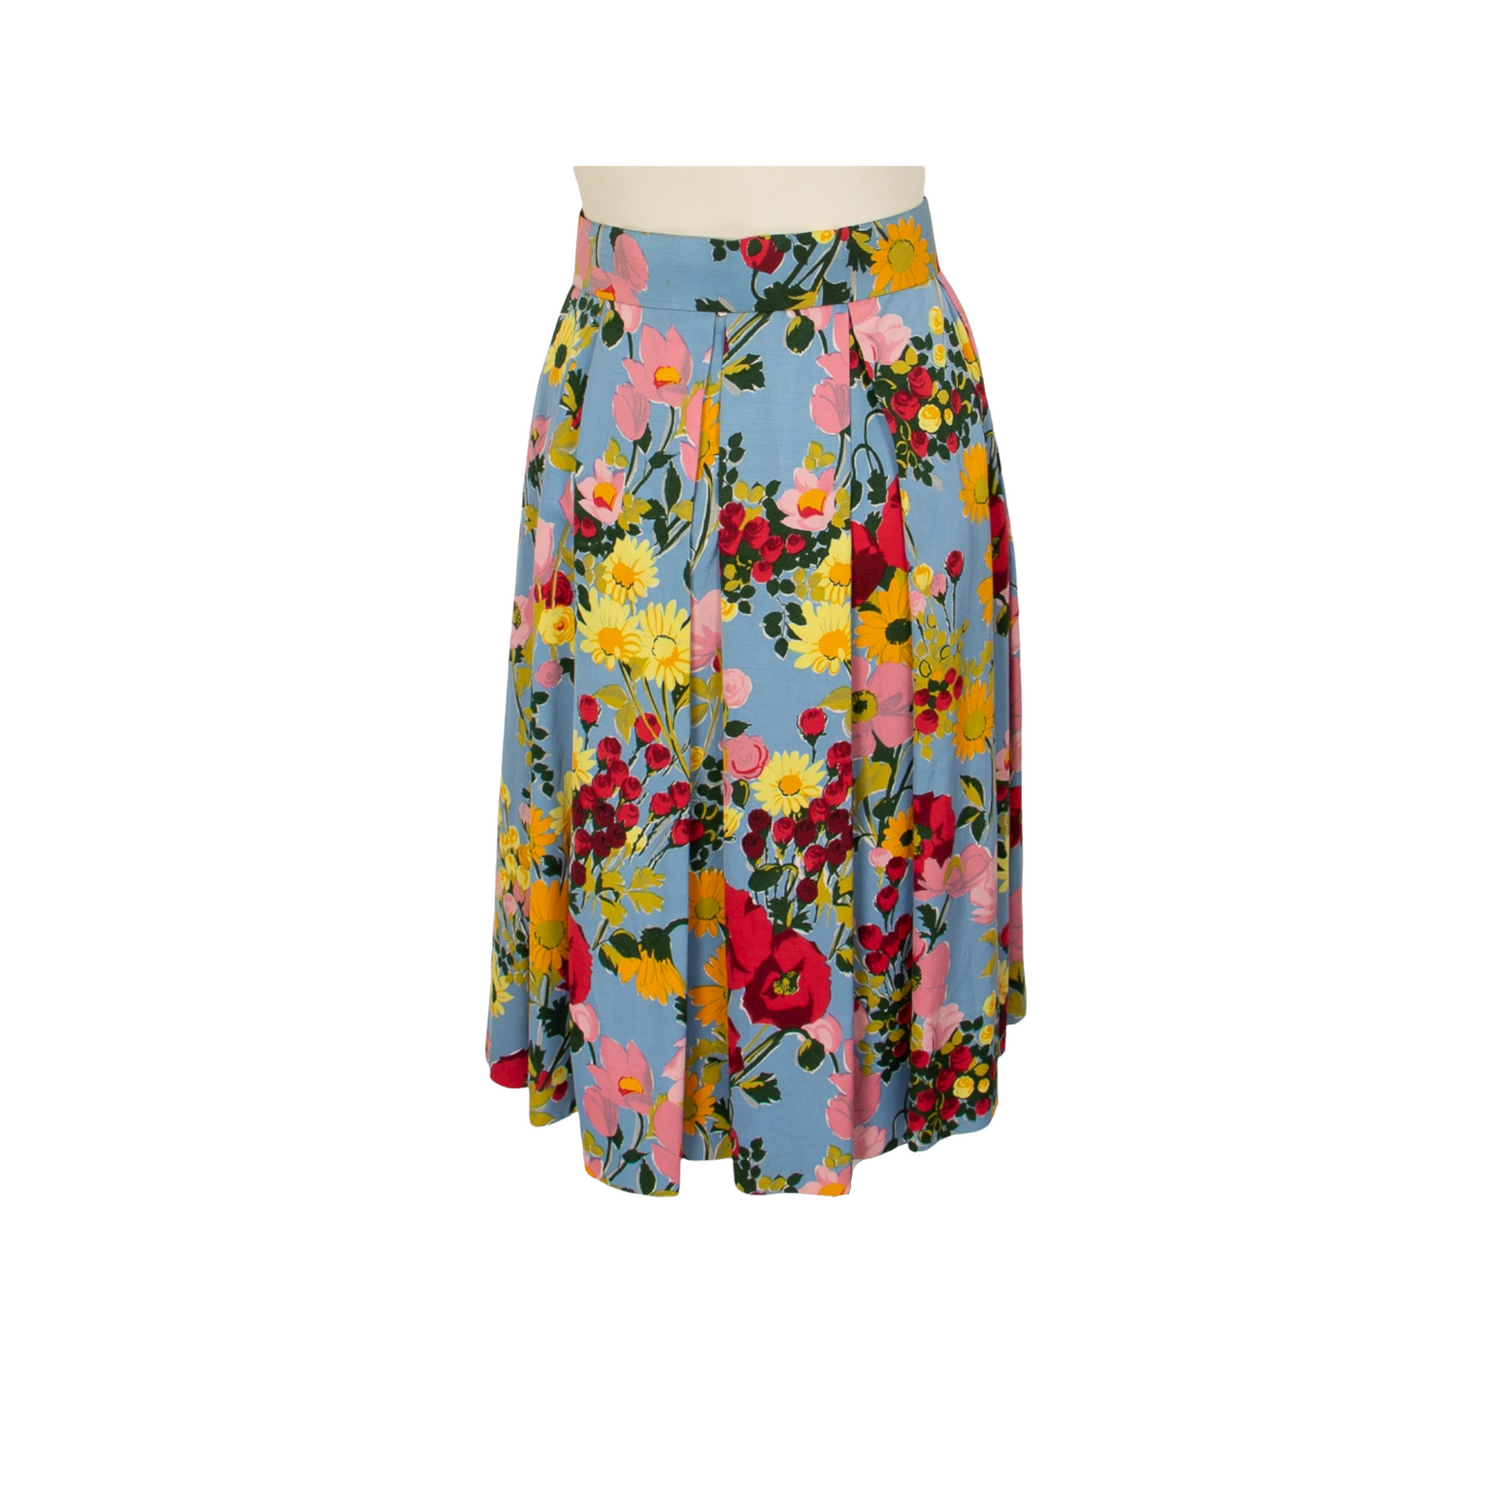 UNKNOWN Skirts vintage Lysis Paris pre-owned secondhand